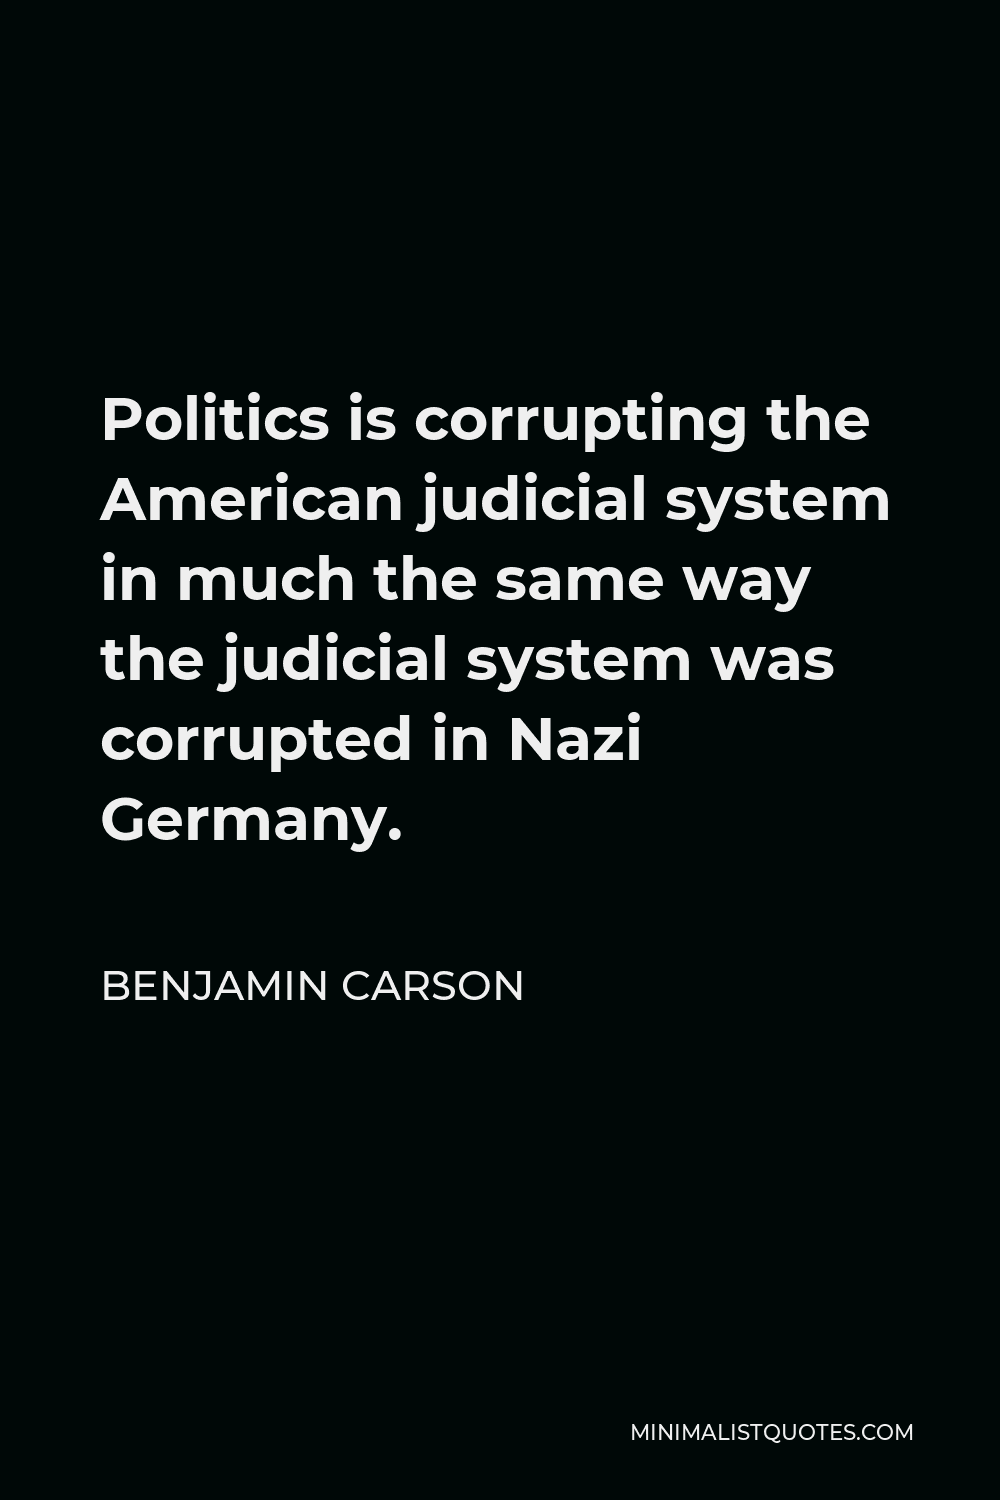 Benjamin Carson Quote - Politics is corrupting the American judicial system in much the same way the judicial system was corrupted in Nazi Germany.